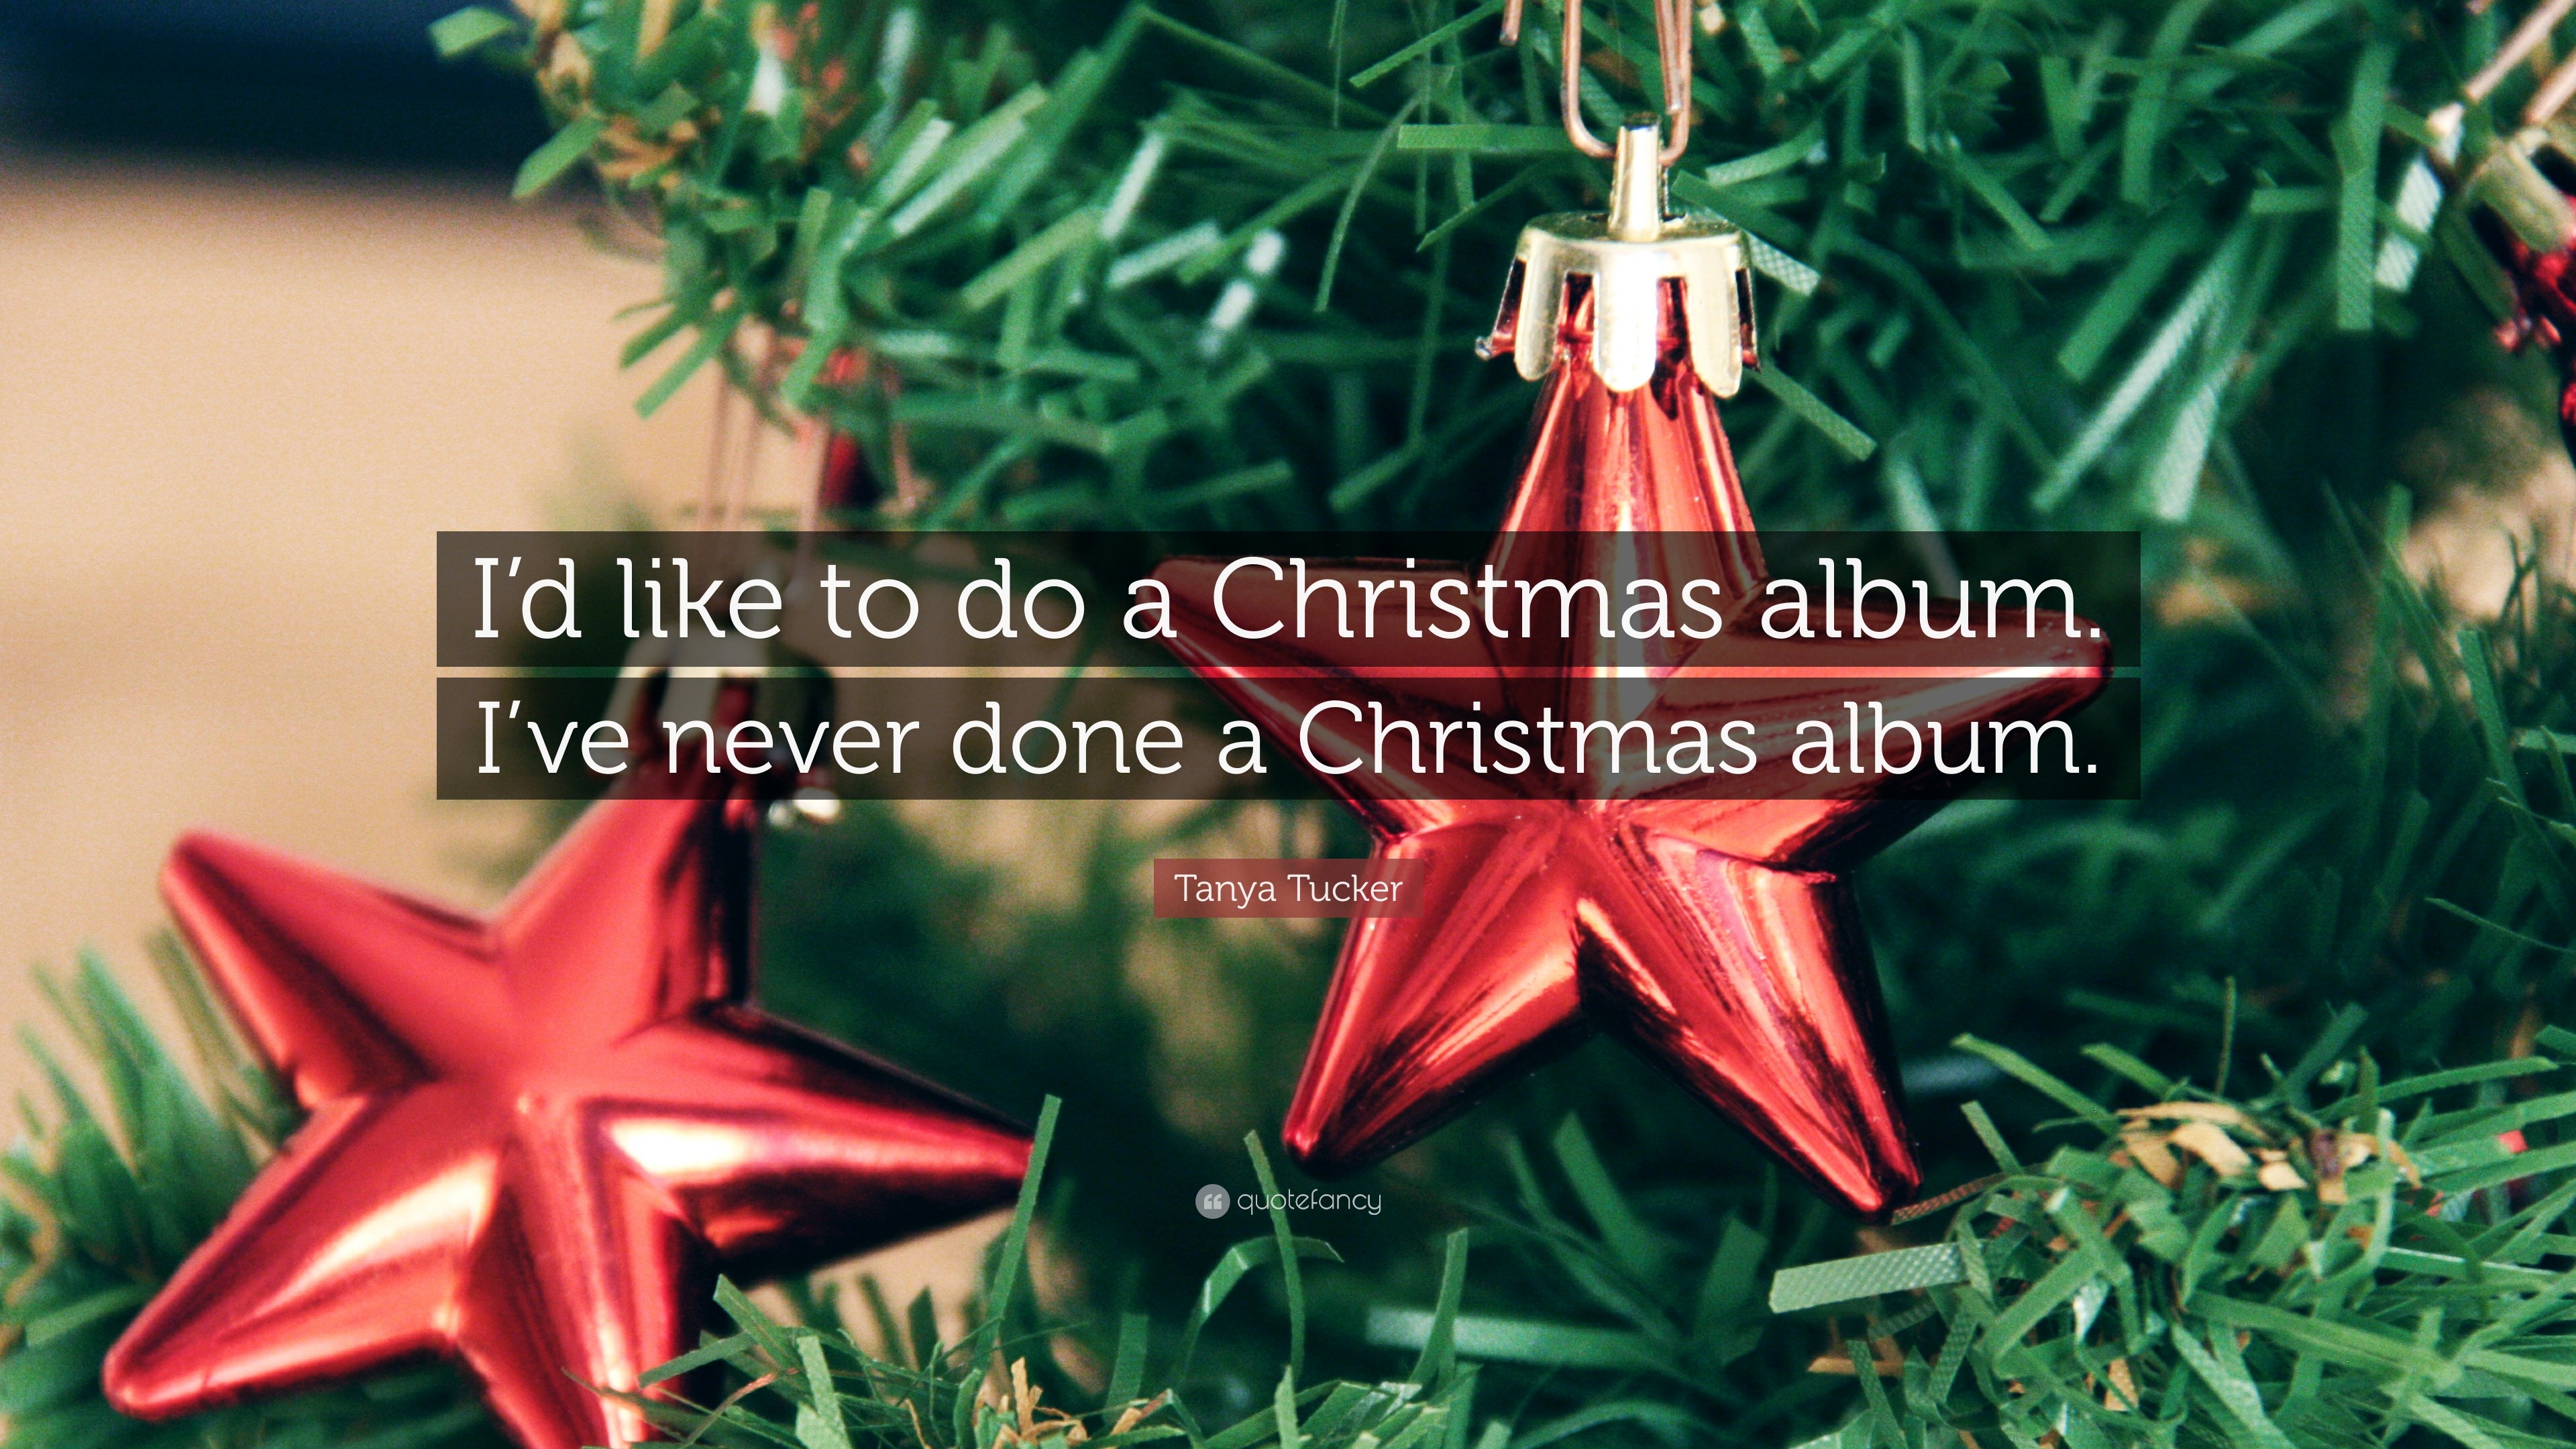 Tanya Tucker Quote: “I’d like to do a Christmas album. I’ve never done a ...3840 x 2160